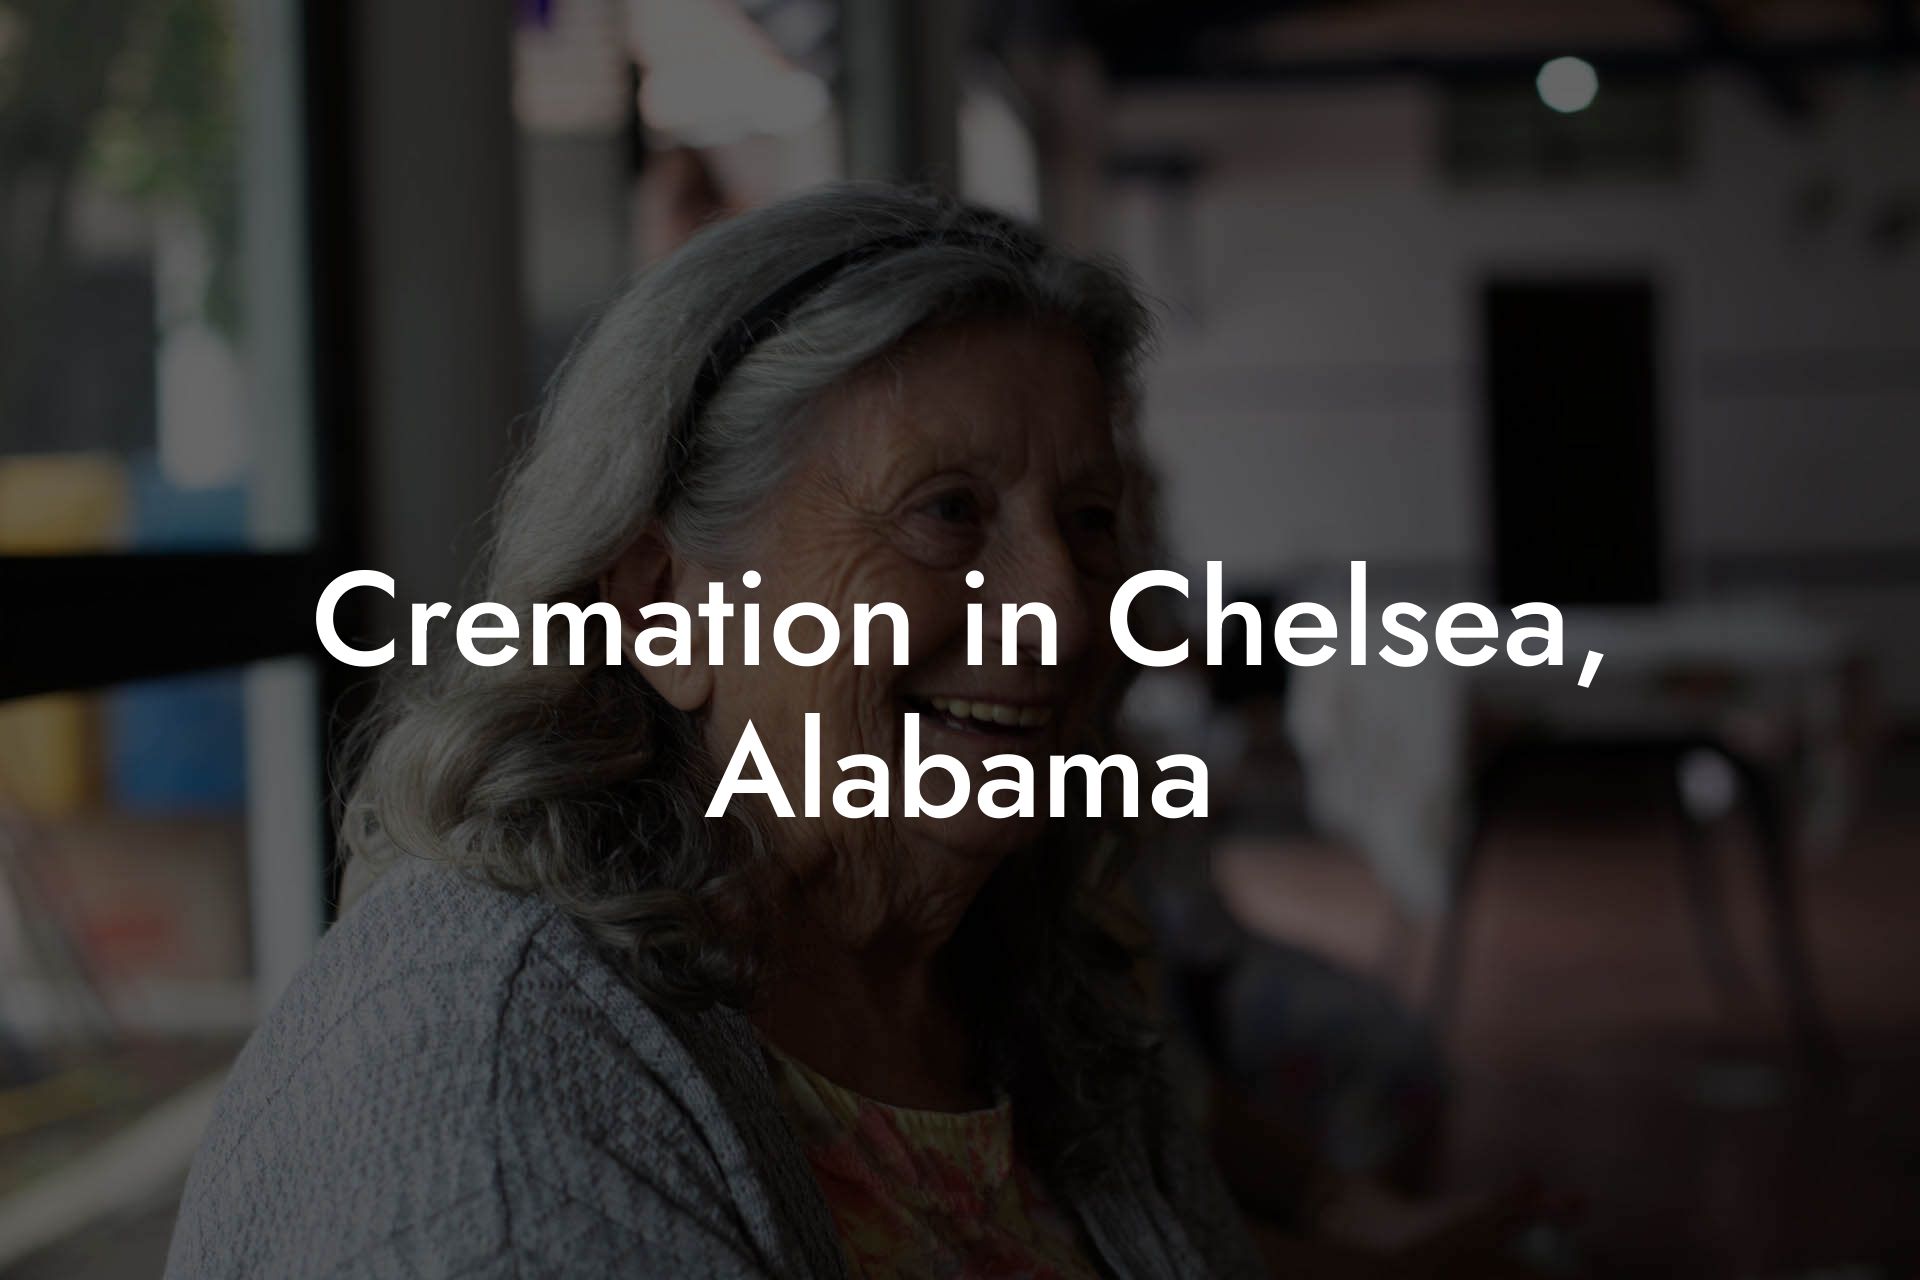 Cremation in Chelsea, Alabama